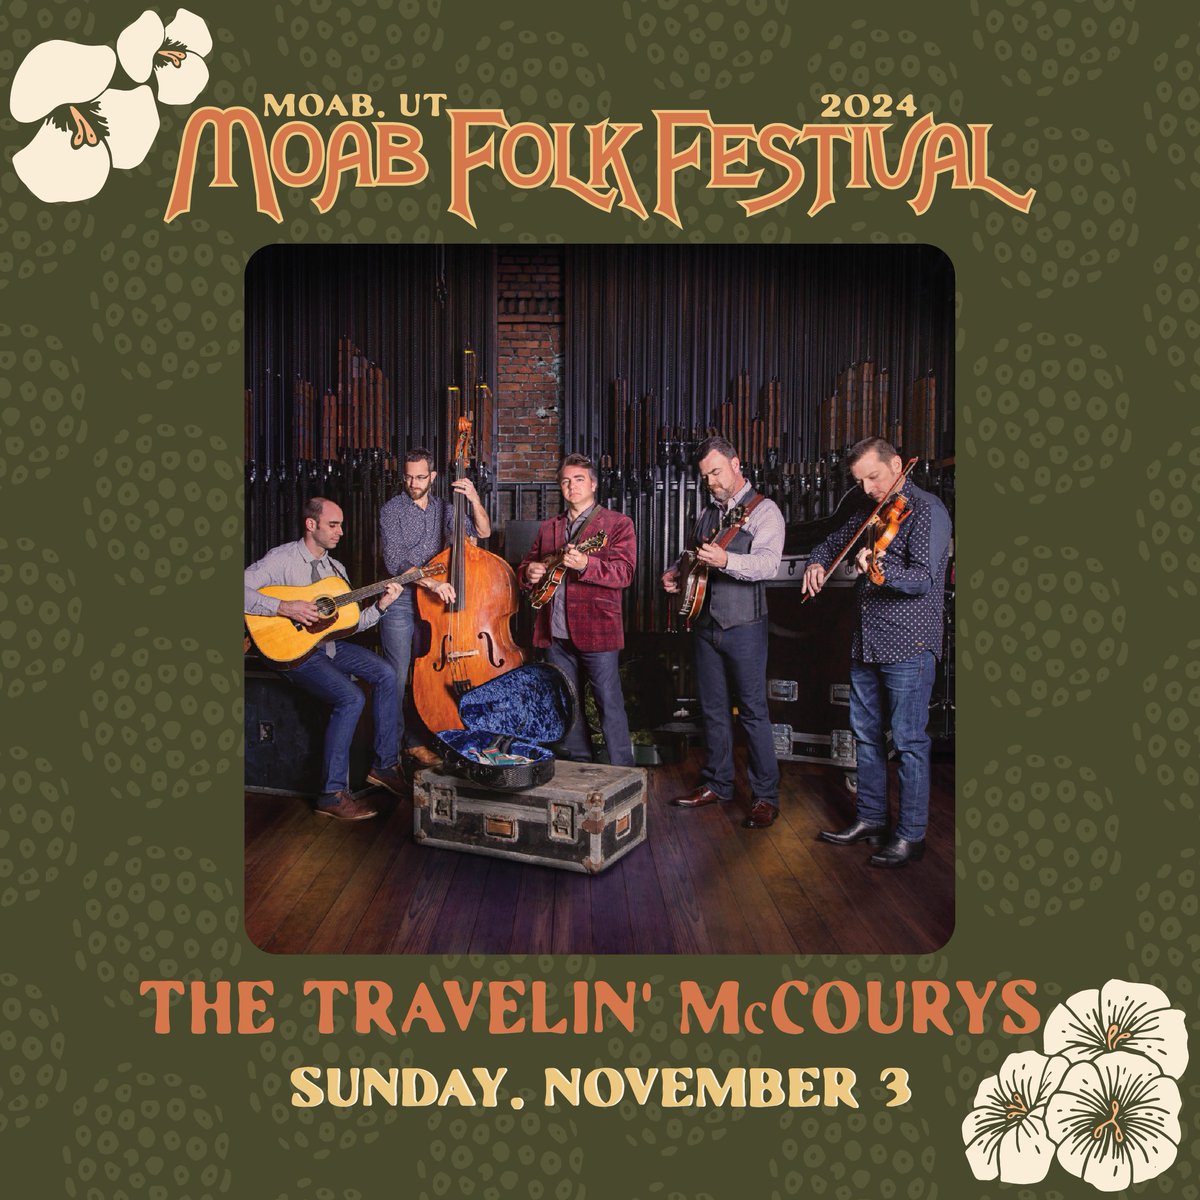 We'll be in Moab, UT for Moab Folk Festival on November 3! 🎻 Tickets are available now: moabfolkfestival.com/tickets #moabut #moabfolkfestival #travelinmccourys